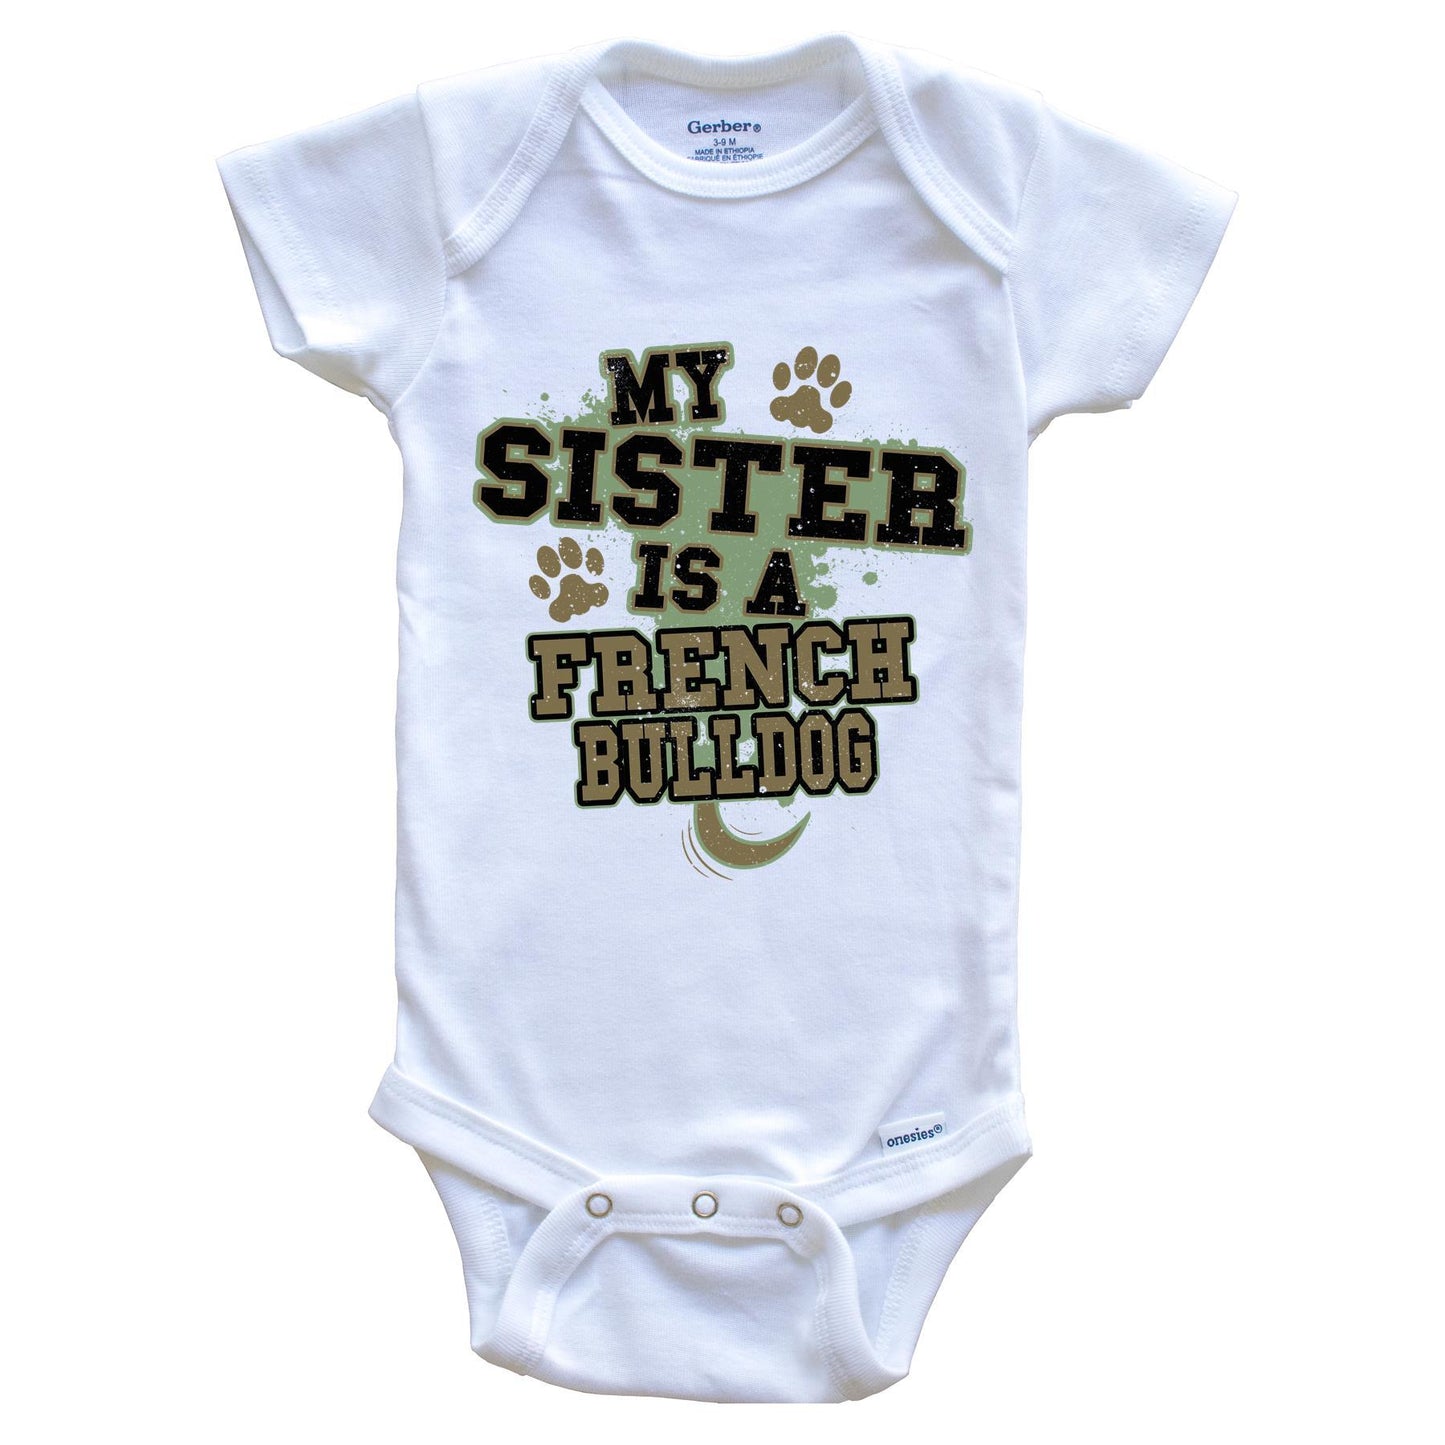 My Sister Is A French Bulldog Funny Dog Baby Onesie